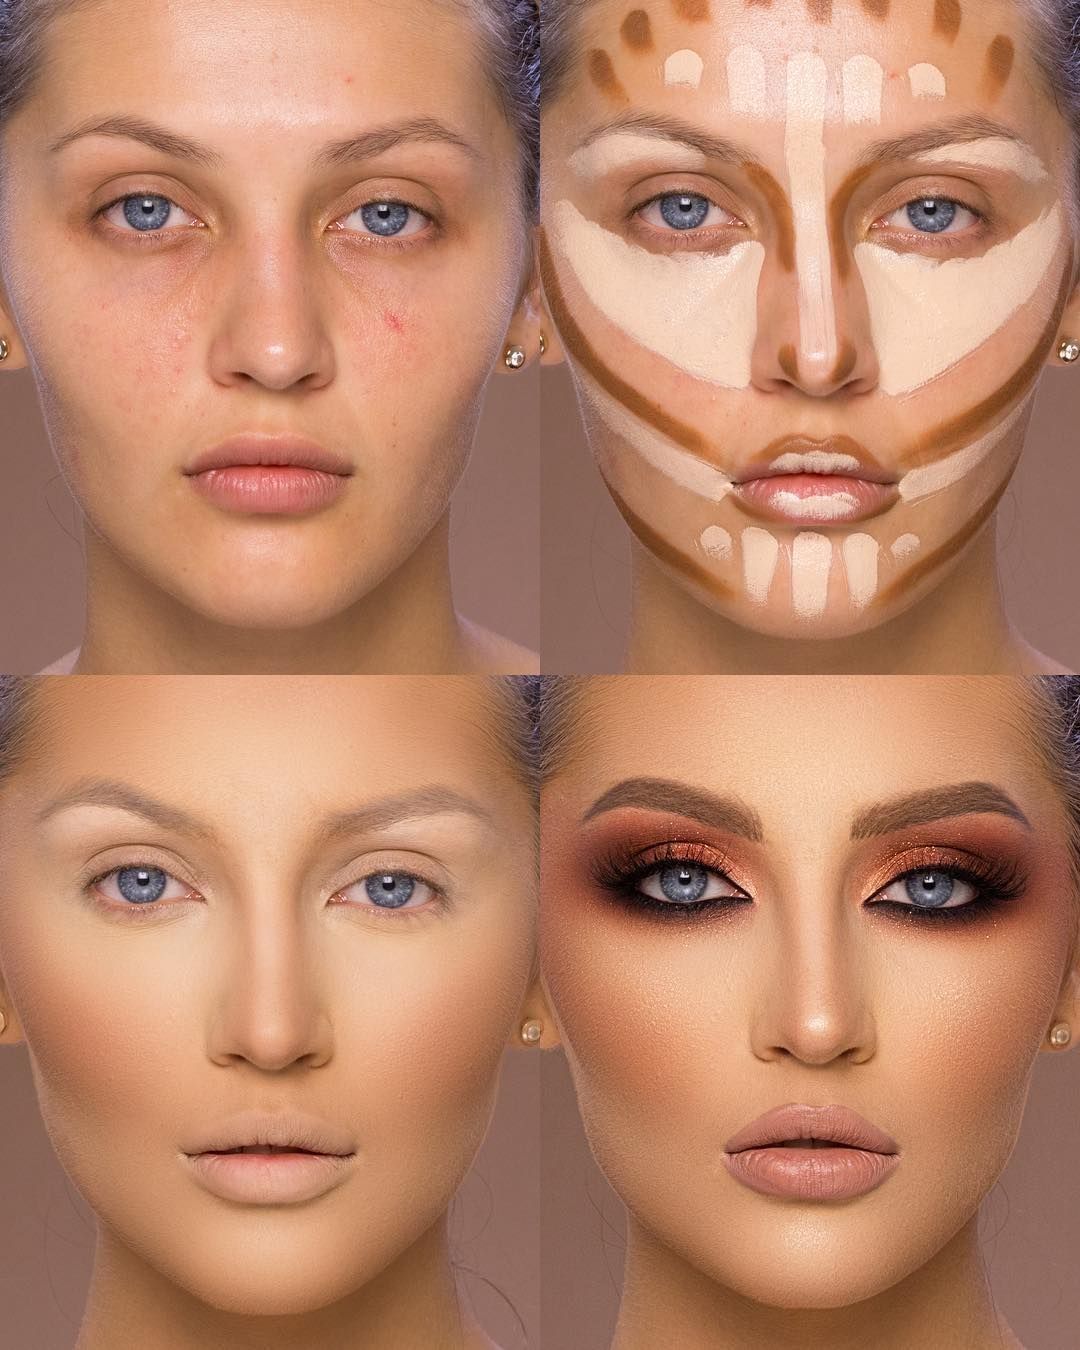 37 Pretty Makeup Tutorials For Beginners and Learners 2019 -   13 makeup Contour how to get ideas